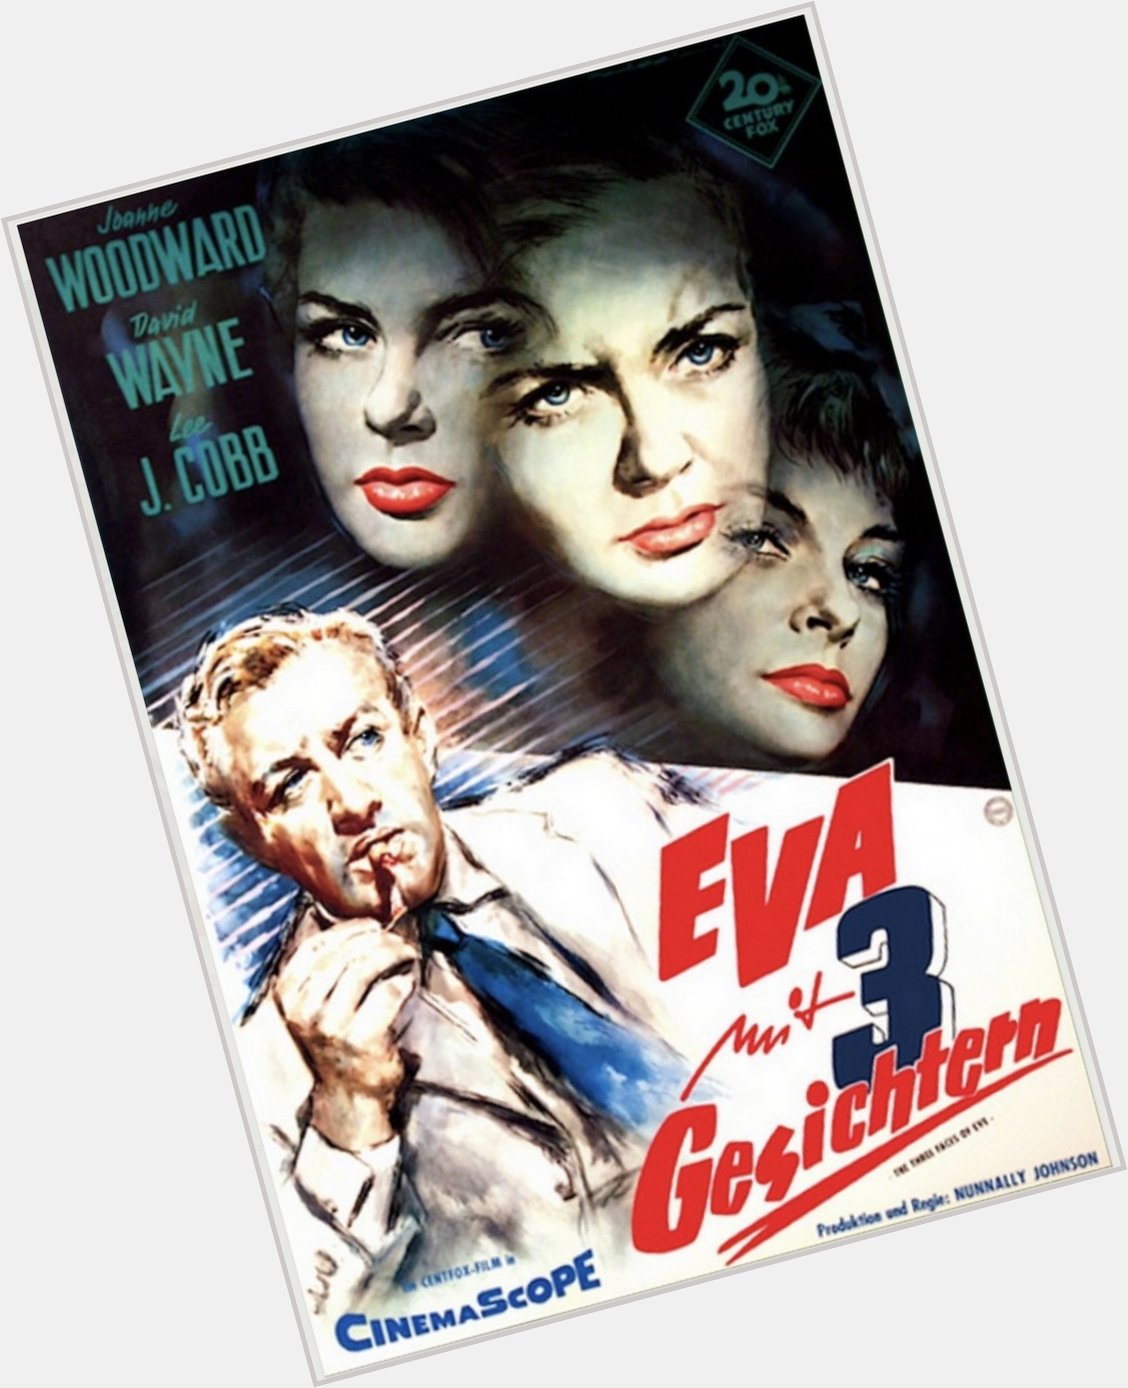 Happy birthday to Joanne Woodward - THE THREE FACES OF EVE - 1957 - German release poster 